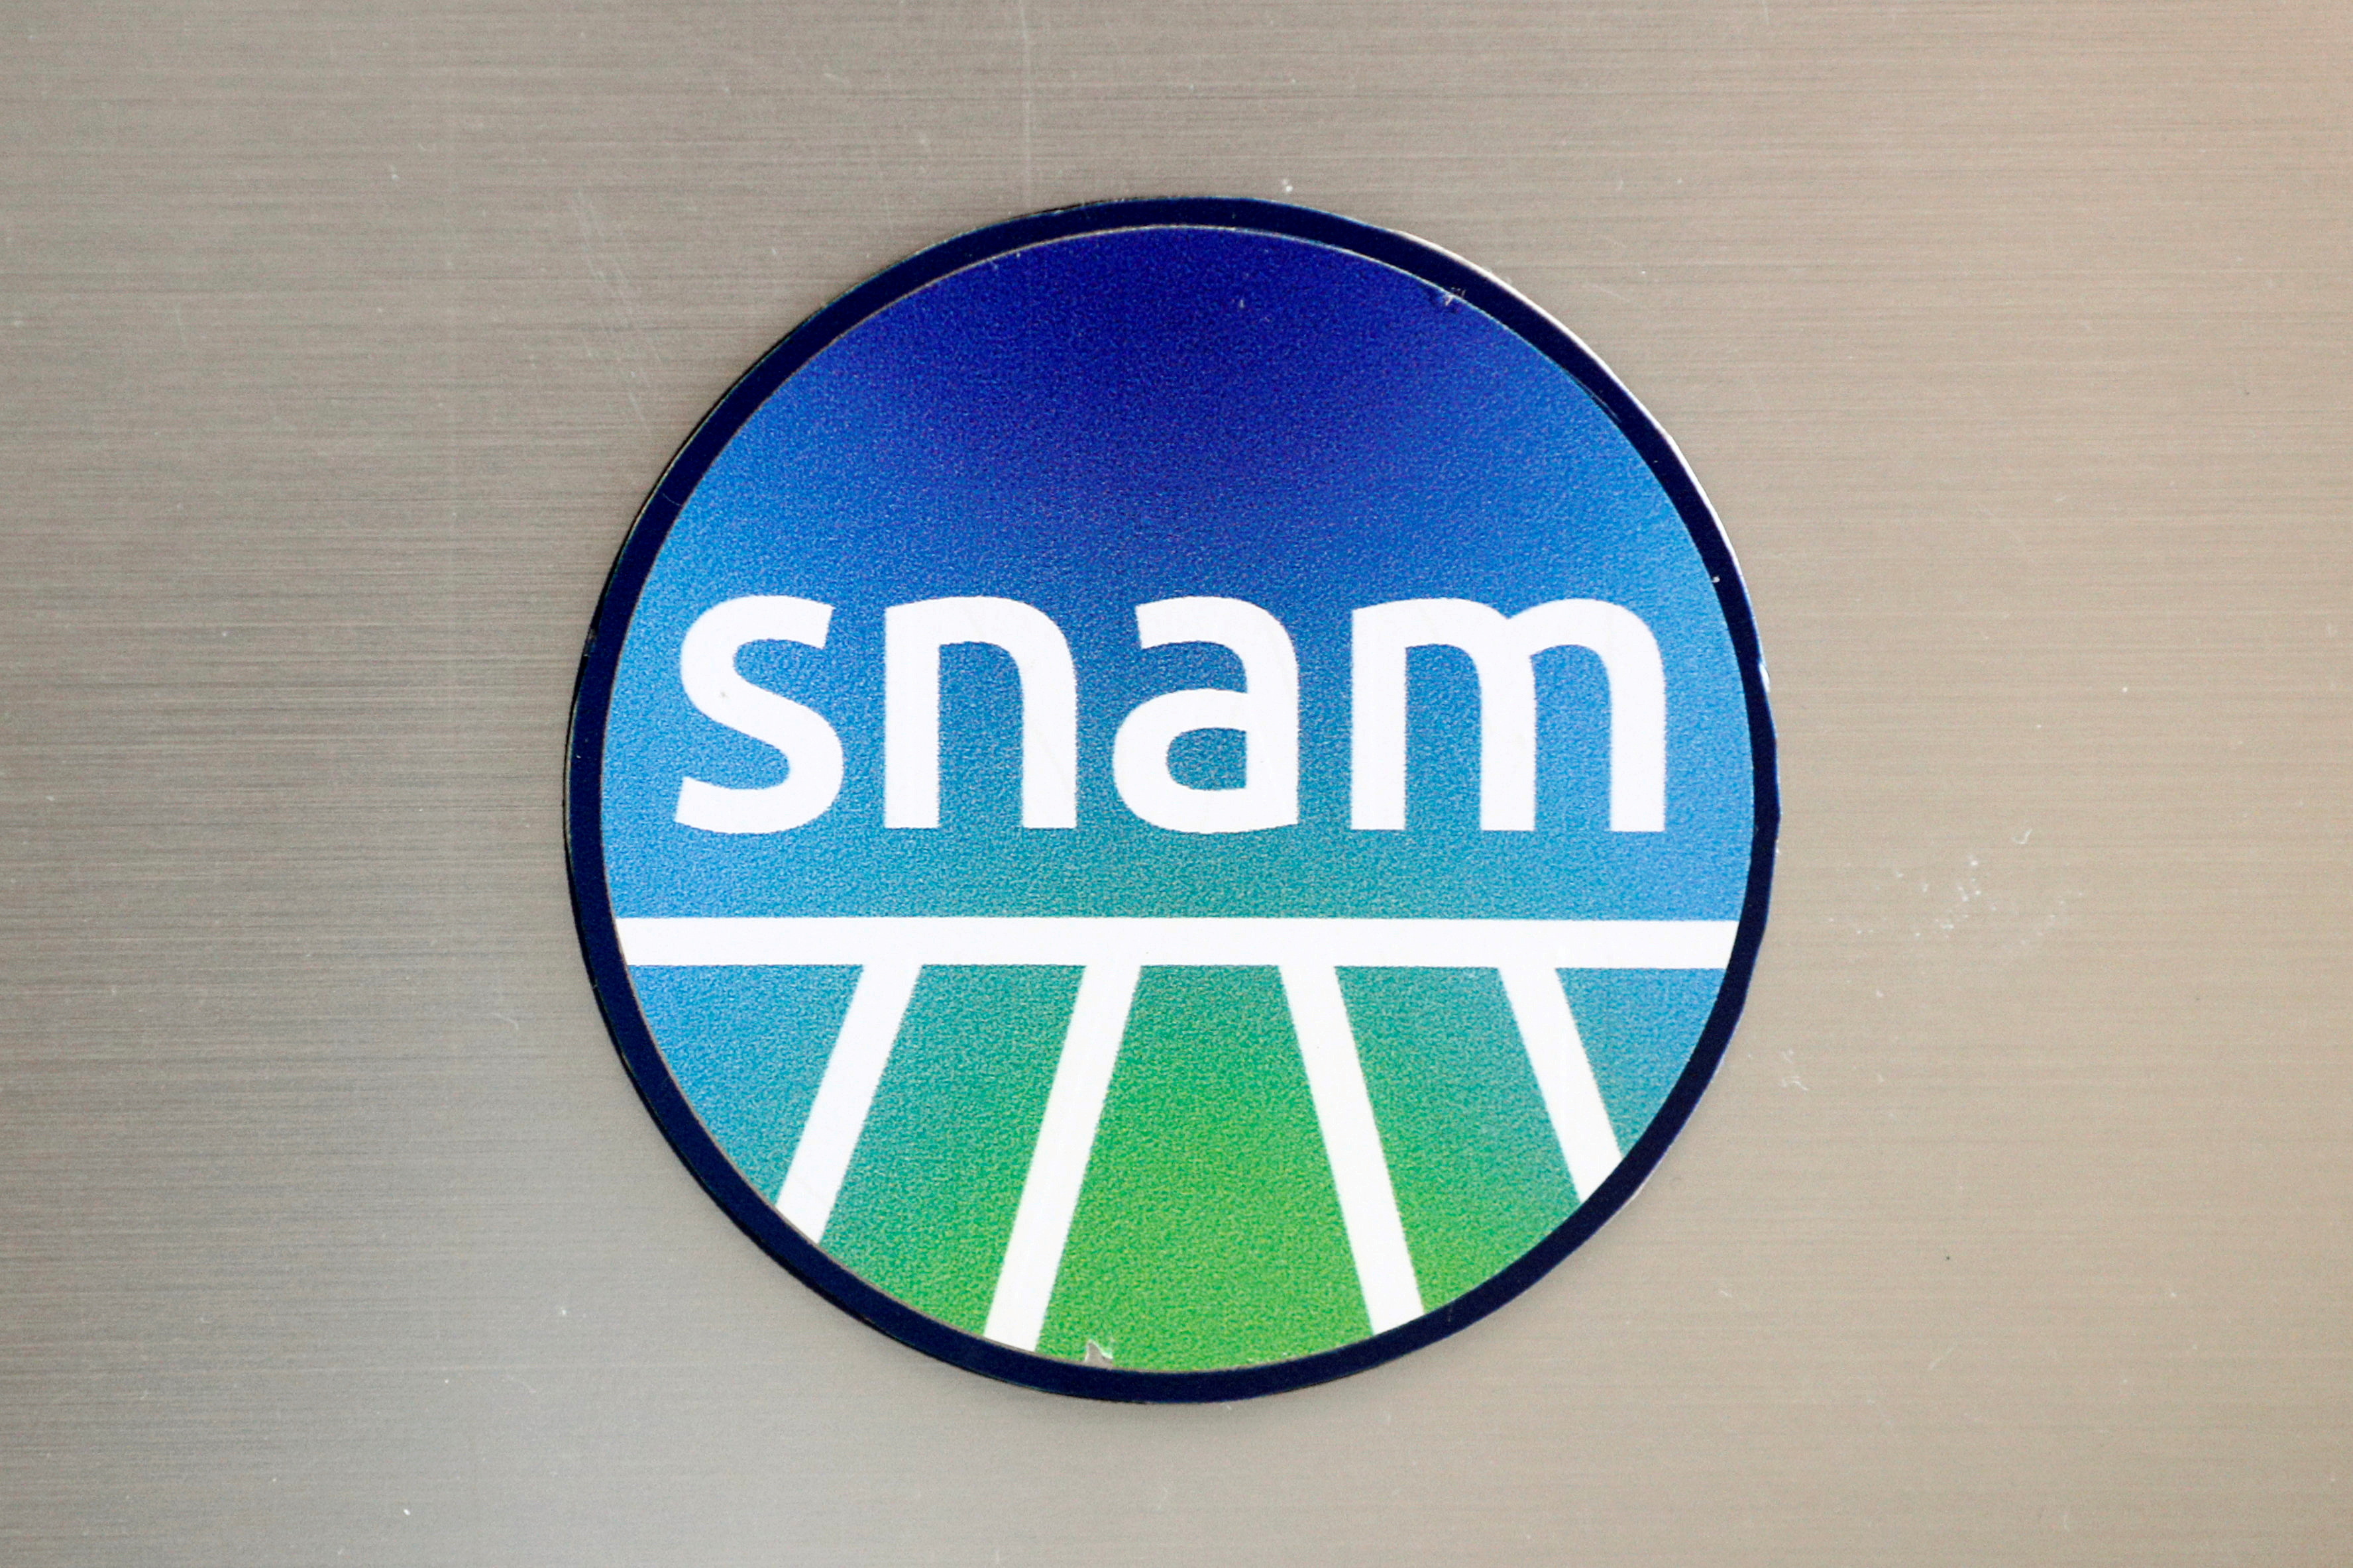 Italian gas group Snam logo is seen outside their office in Rome